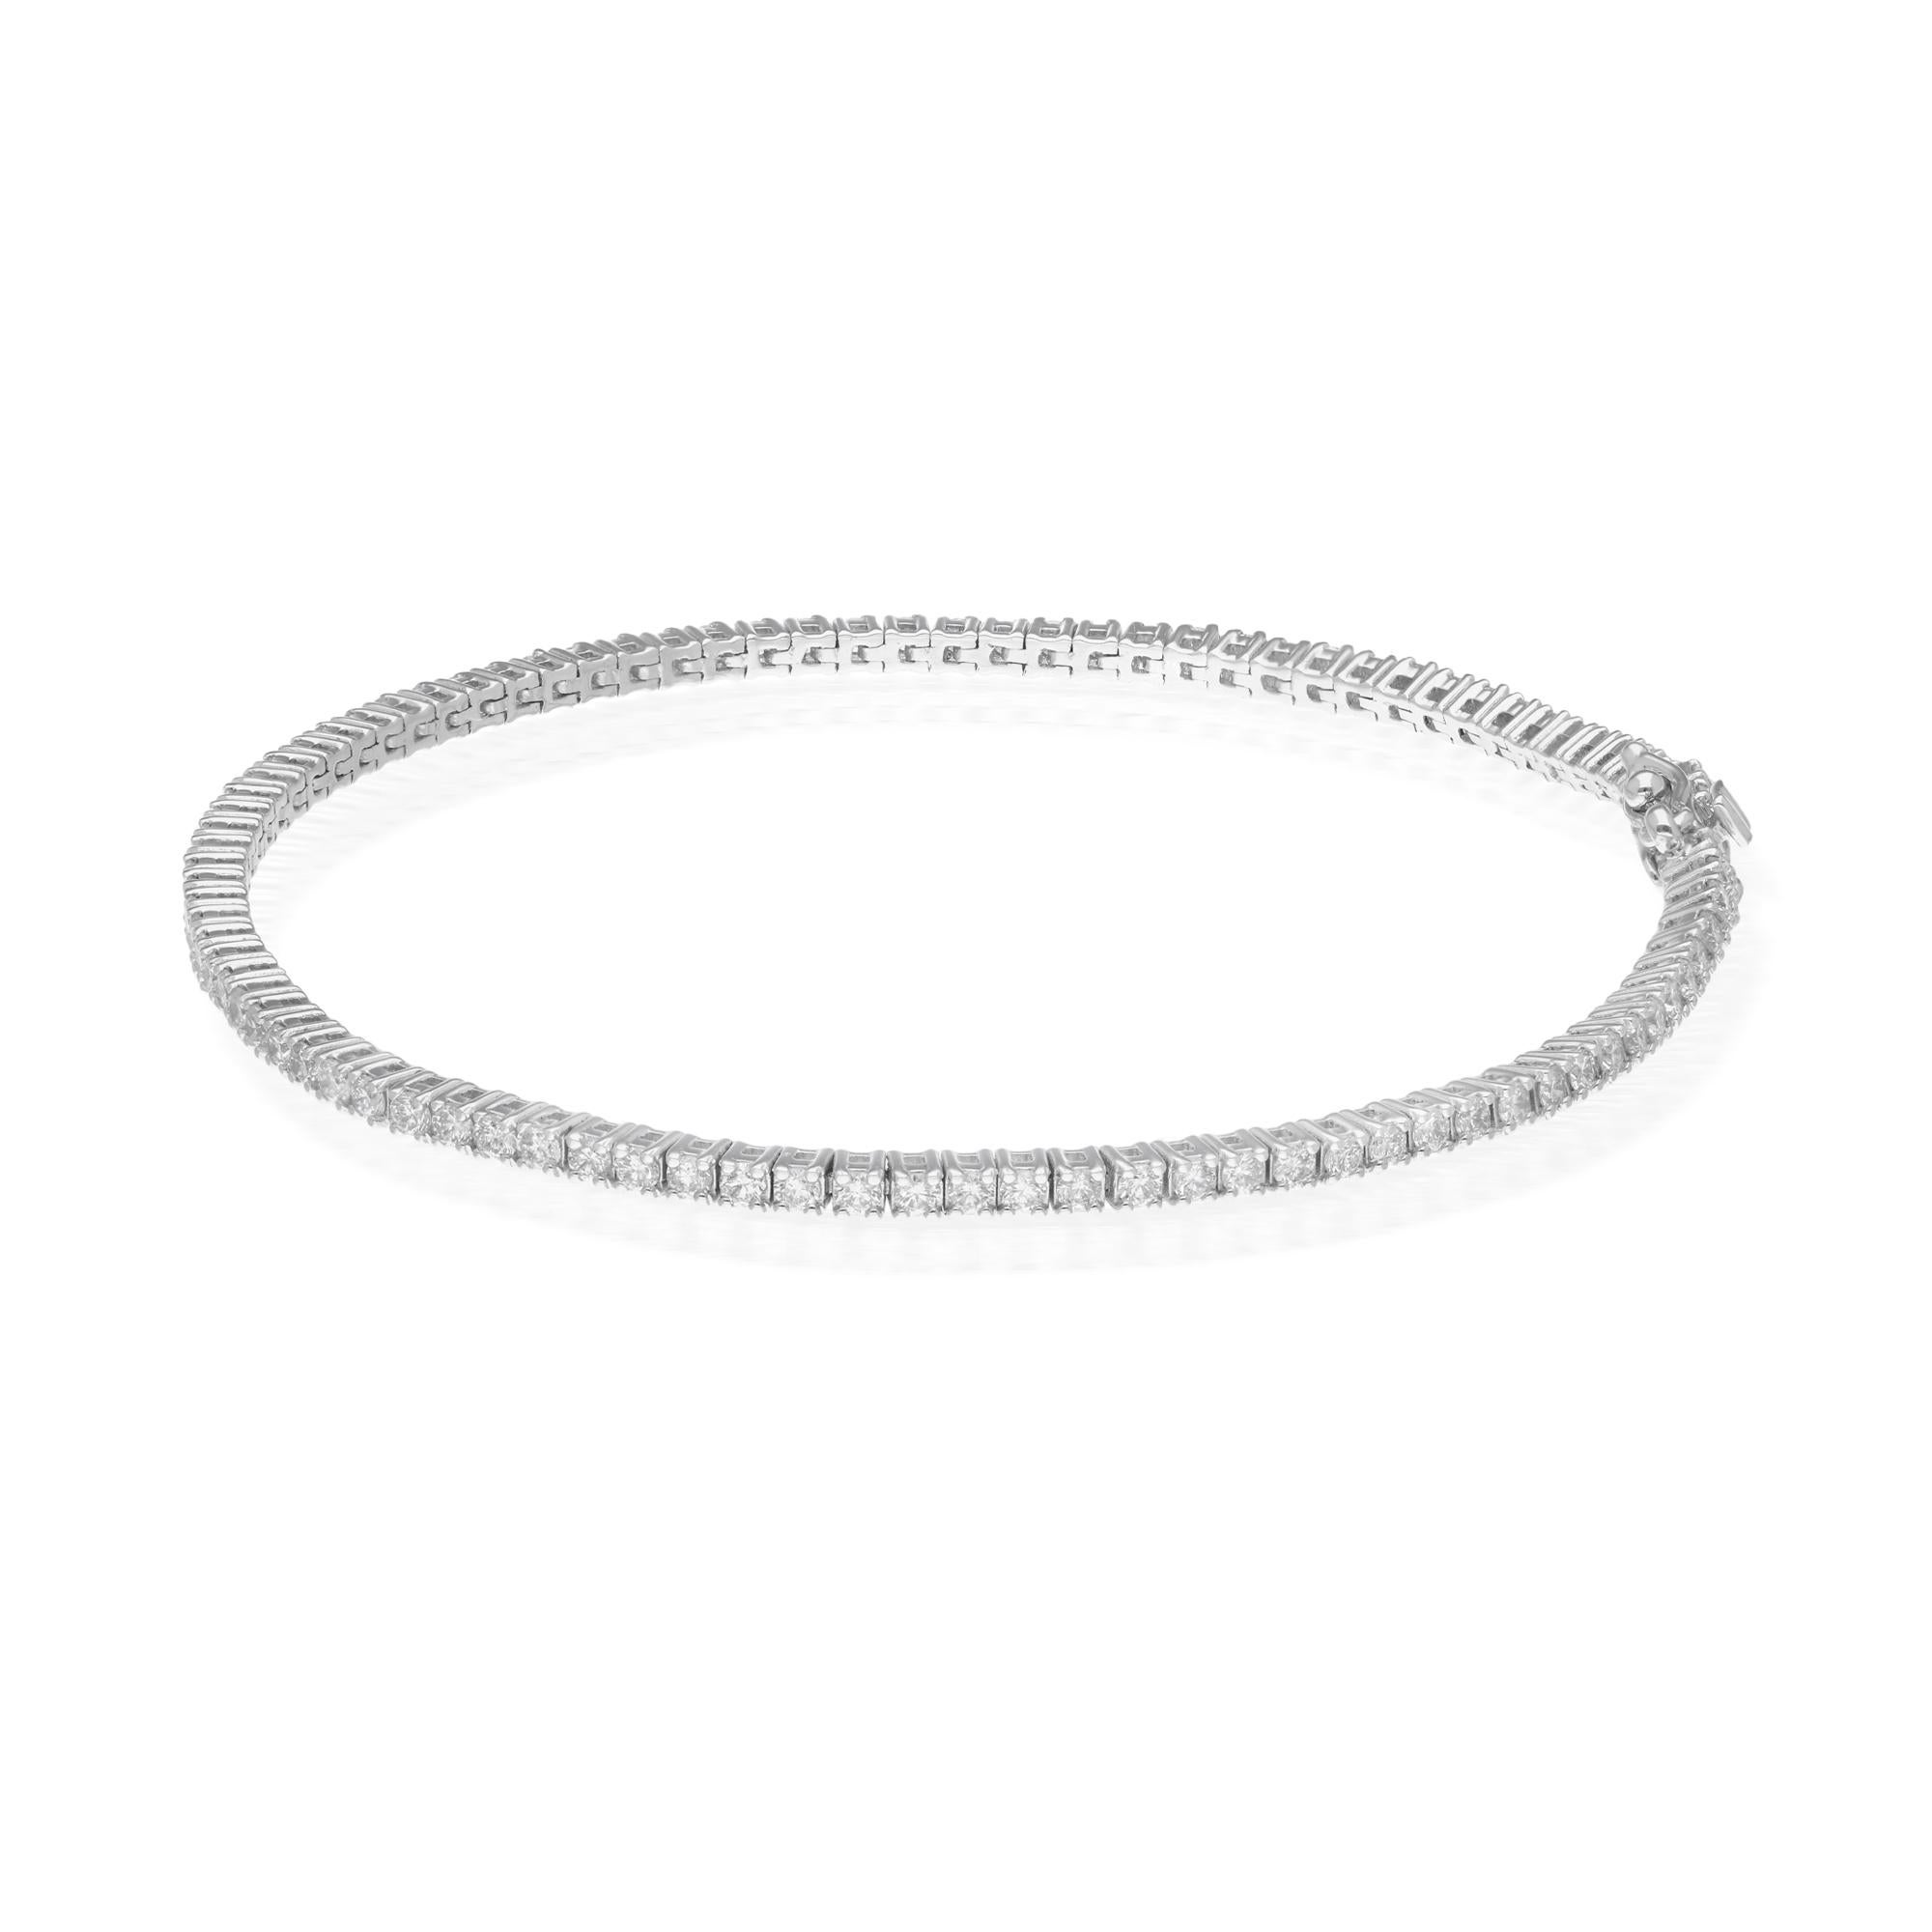 The brilliance of the diamonds is further accentuated by the lustrous white gold, creating a harmonious contrast that enhances the overall allure of the piece. Whether worn alone for a touch of refined sophistication or layered with other bracelets